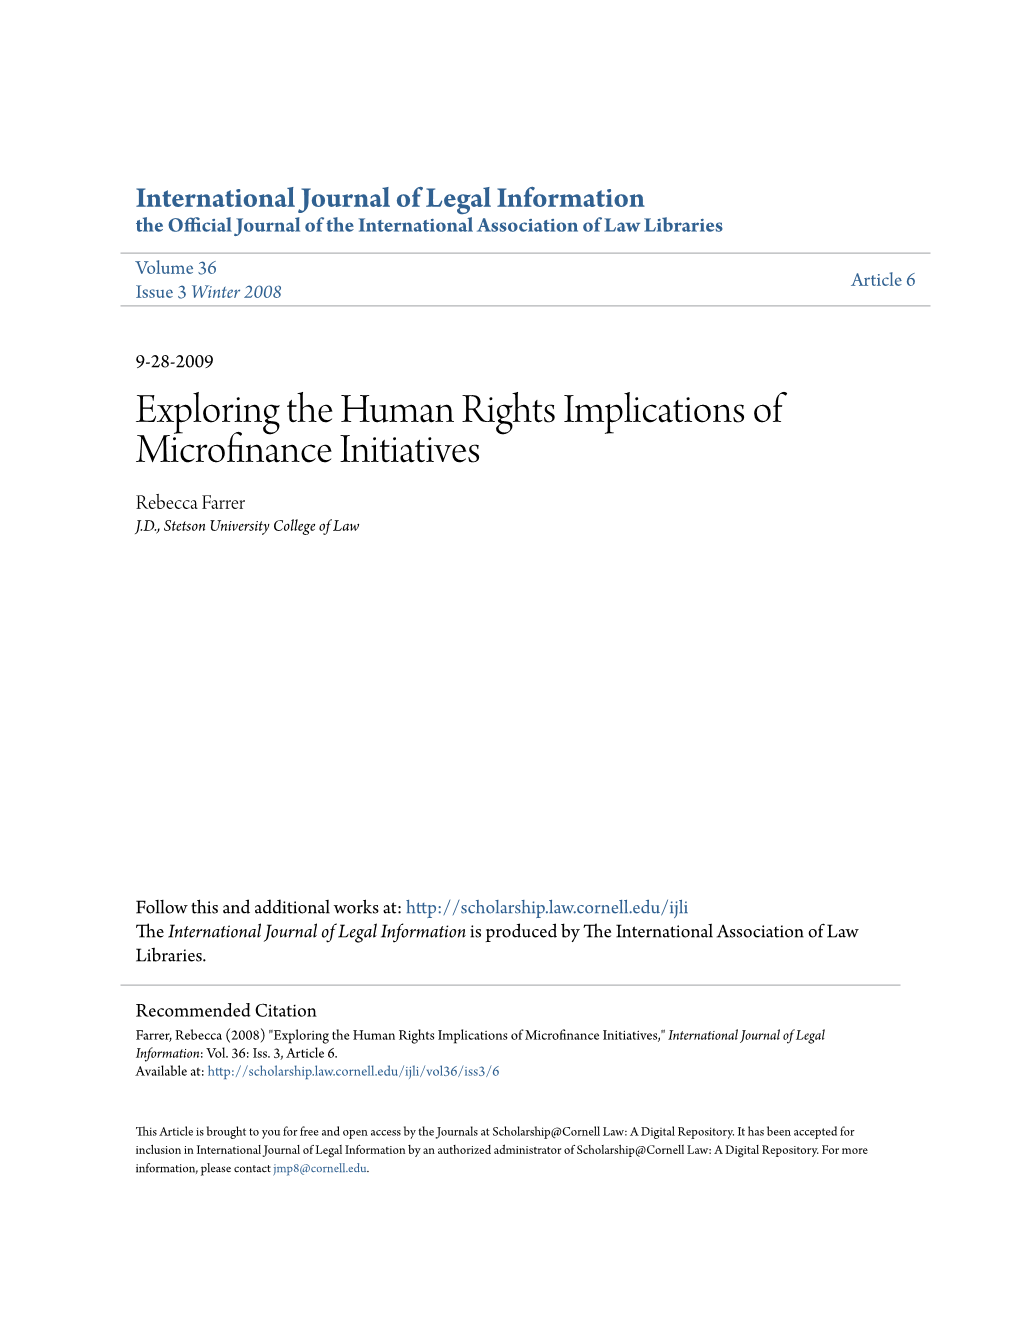 Exploring the Human Rights Implications of Microfinance Initiatives Rebecca Farrer J.D., Stetson University College of Law